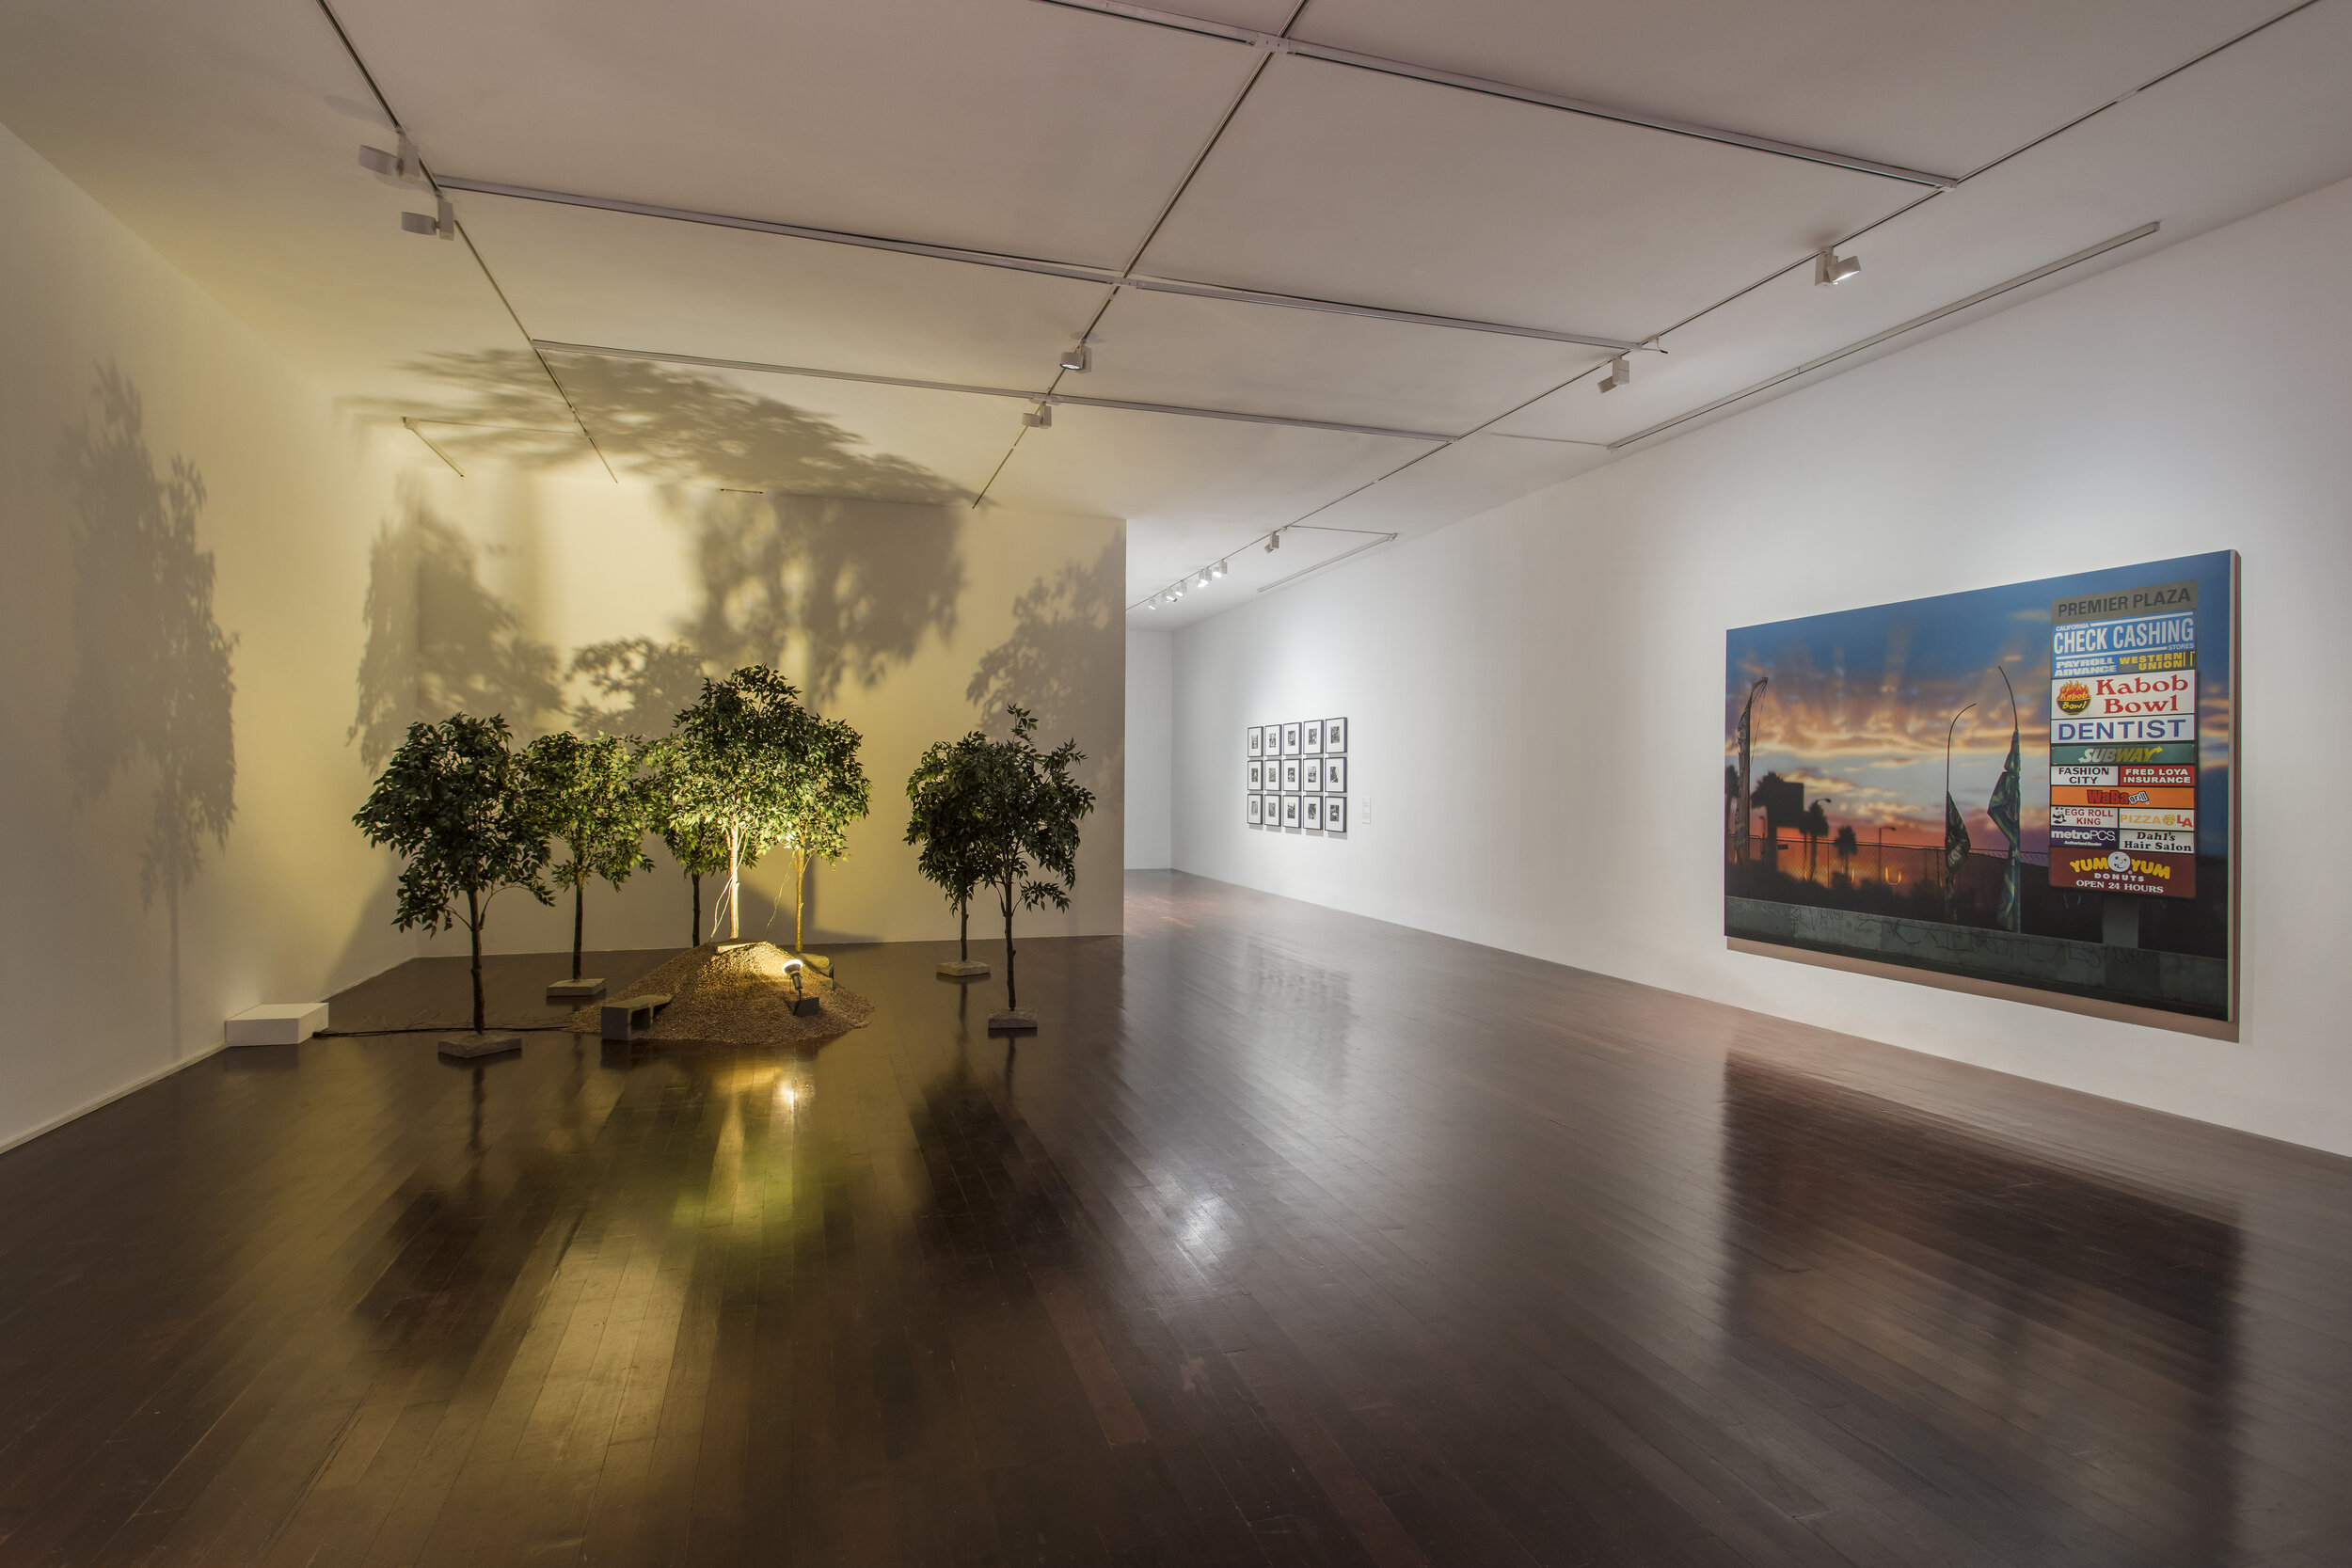  In Production: Art and the Studio System, 2019. Installation view. Image courtesy of Yuz Museum Shanghai. Photo by JJYPhoto 